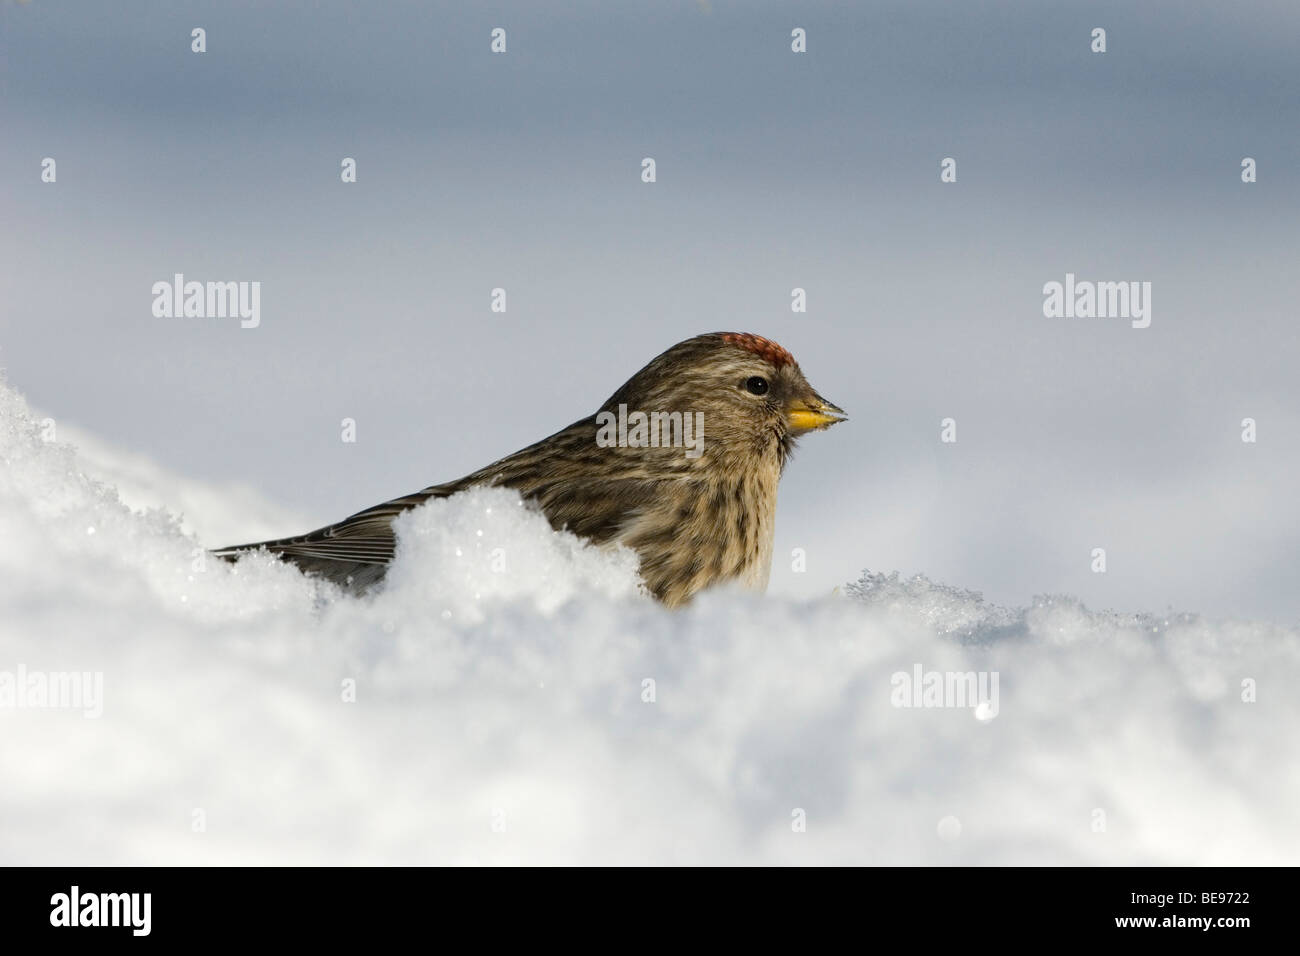 Een Grote Barmsijs zittend in de sneeuw,A Mealy Redpoll sitting in the snow. Stock Photo